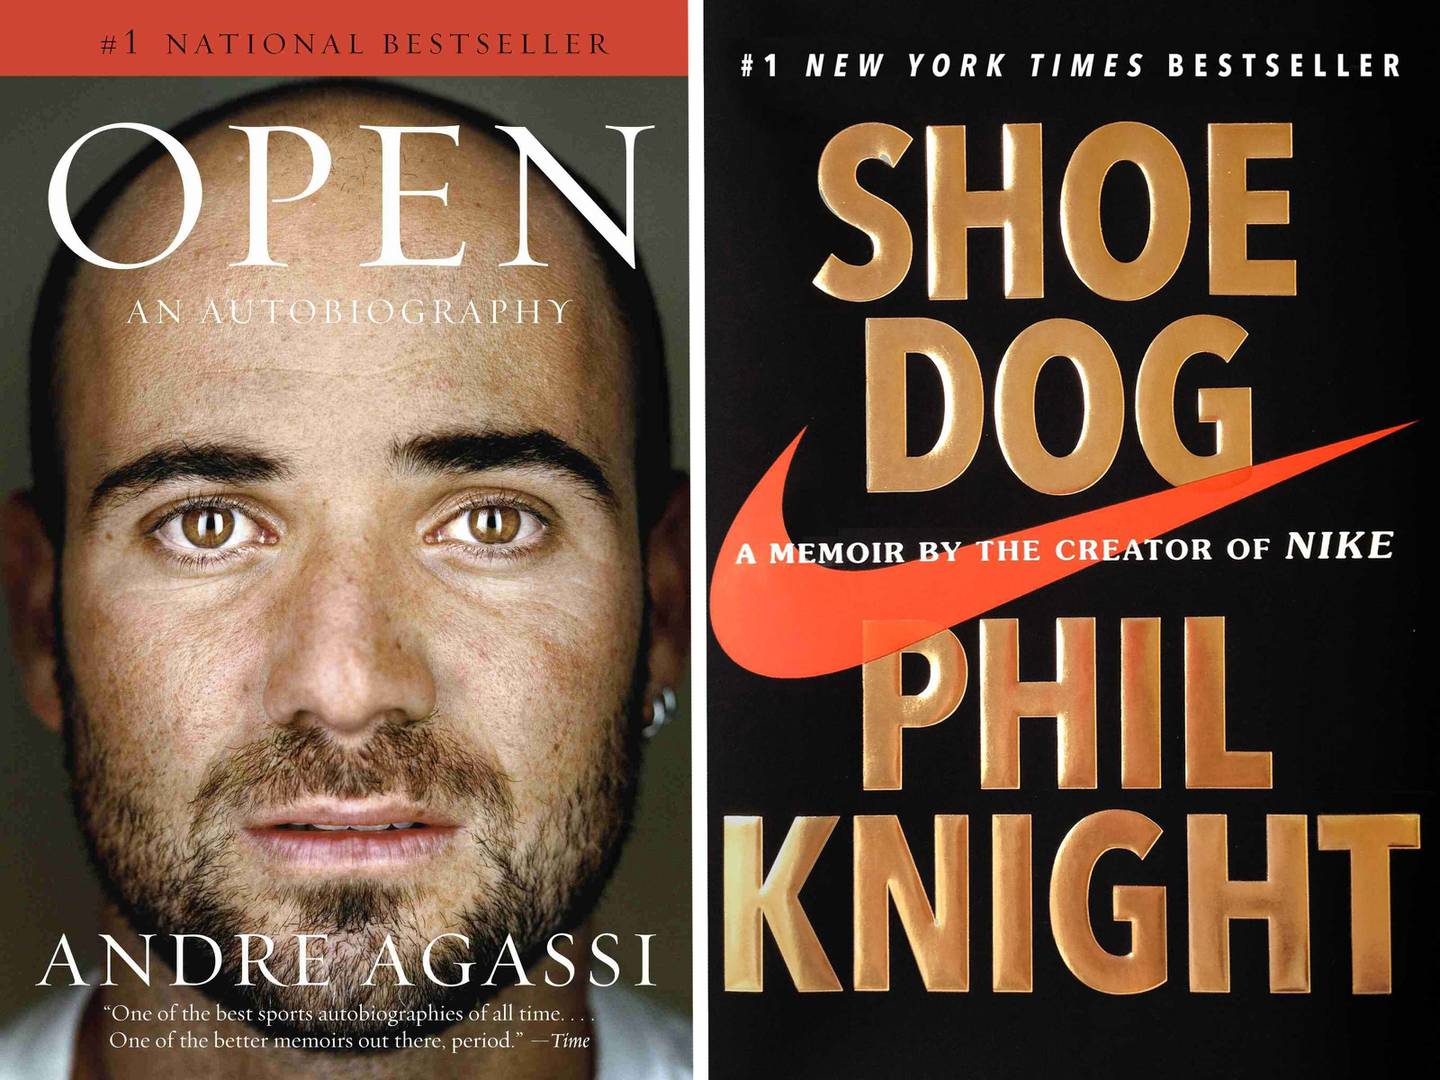 J R Moehringer ghostwrote Andre Agassi's Open and Nike co-founder Phil Knight's Shoe Dog autobiographies. Photo: Harper Collins / Simon & Schuster